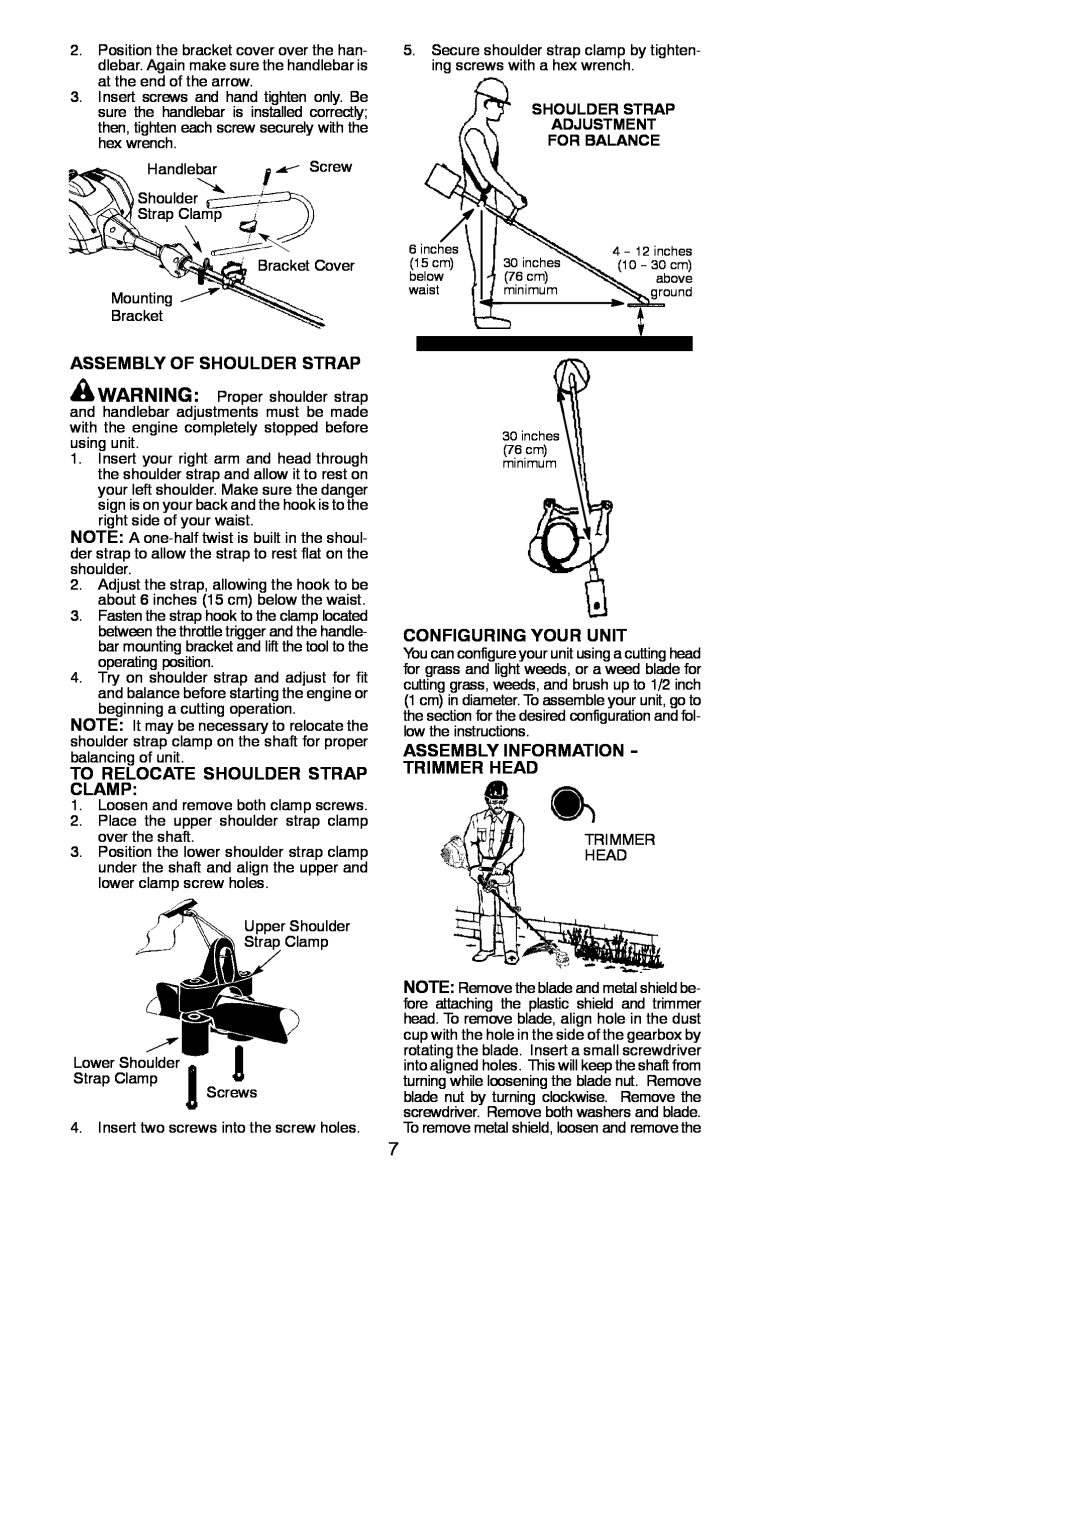 Poulan 545186843 instruction manual Assembly Of Shoulder Strap, To Relocate Shoulder Strap Clamp, Configuring Your Unit 